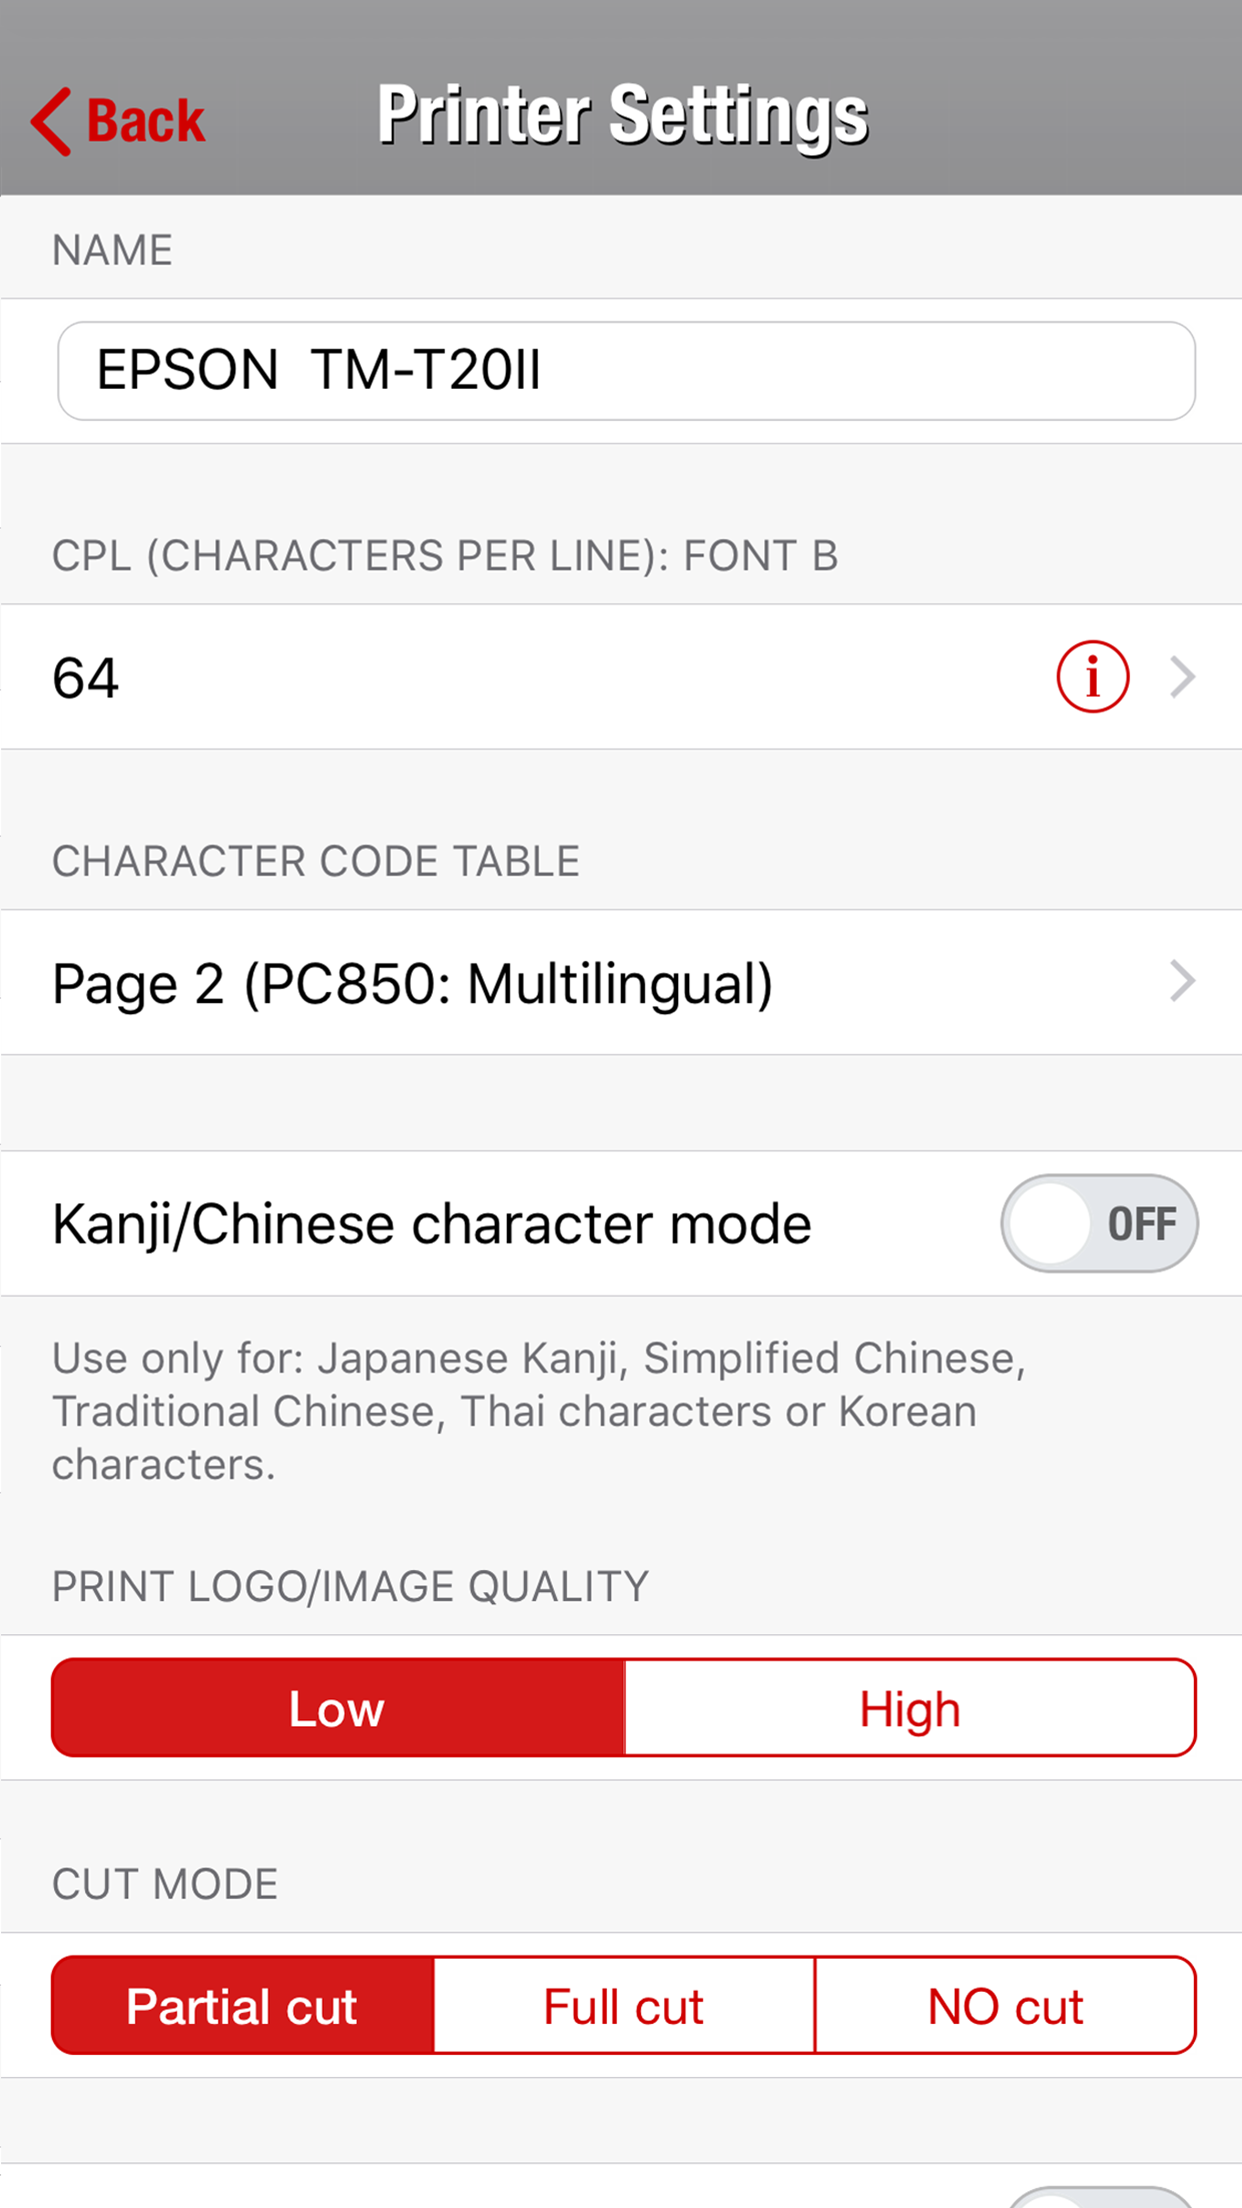 Restaurant POS system, Waiter POS, printer settings, epson tm-t20II, print image quality, cut mode, partial cut, full cut, no cut, kanji chinese character mode, Japanese Kanji, Simplified Chinese, Traditional Chinese, Thai characters or Korean characters, character code table, pc850 multilingual